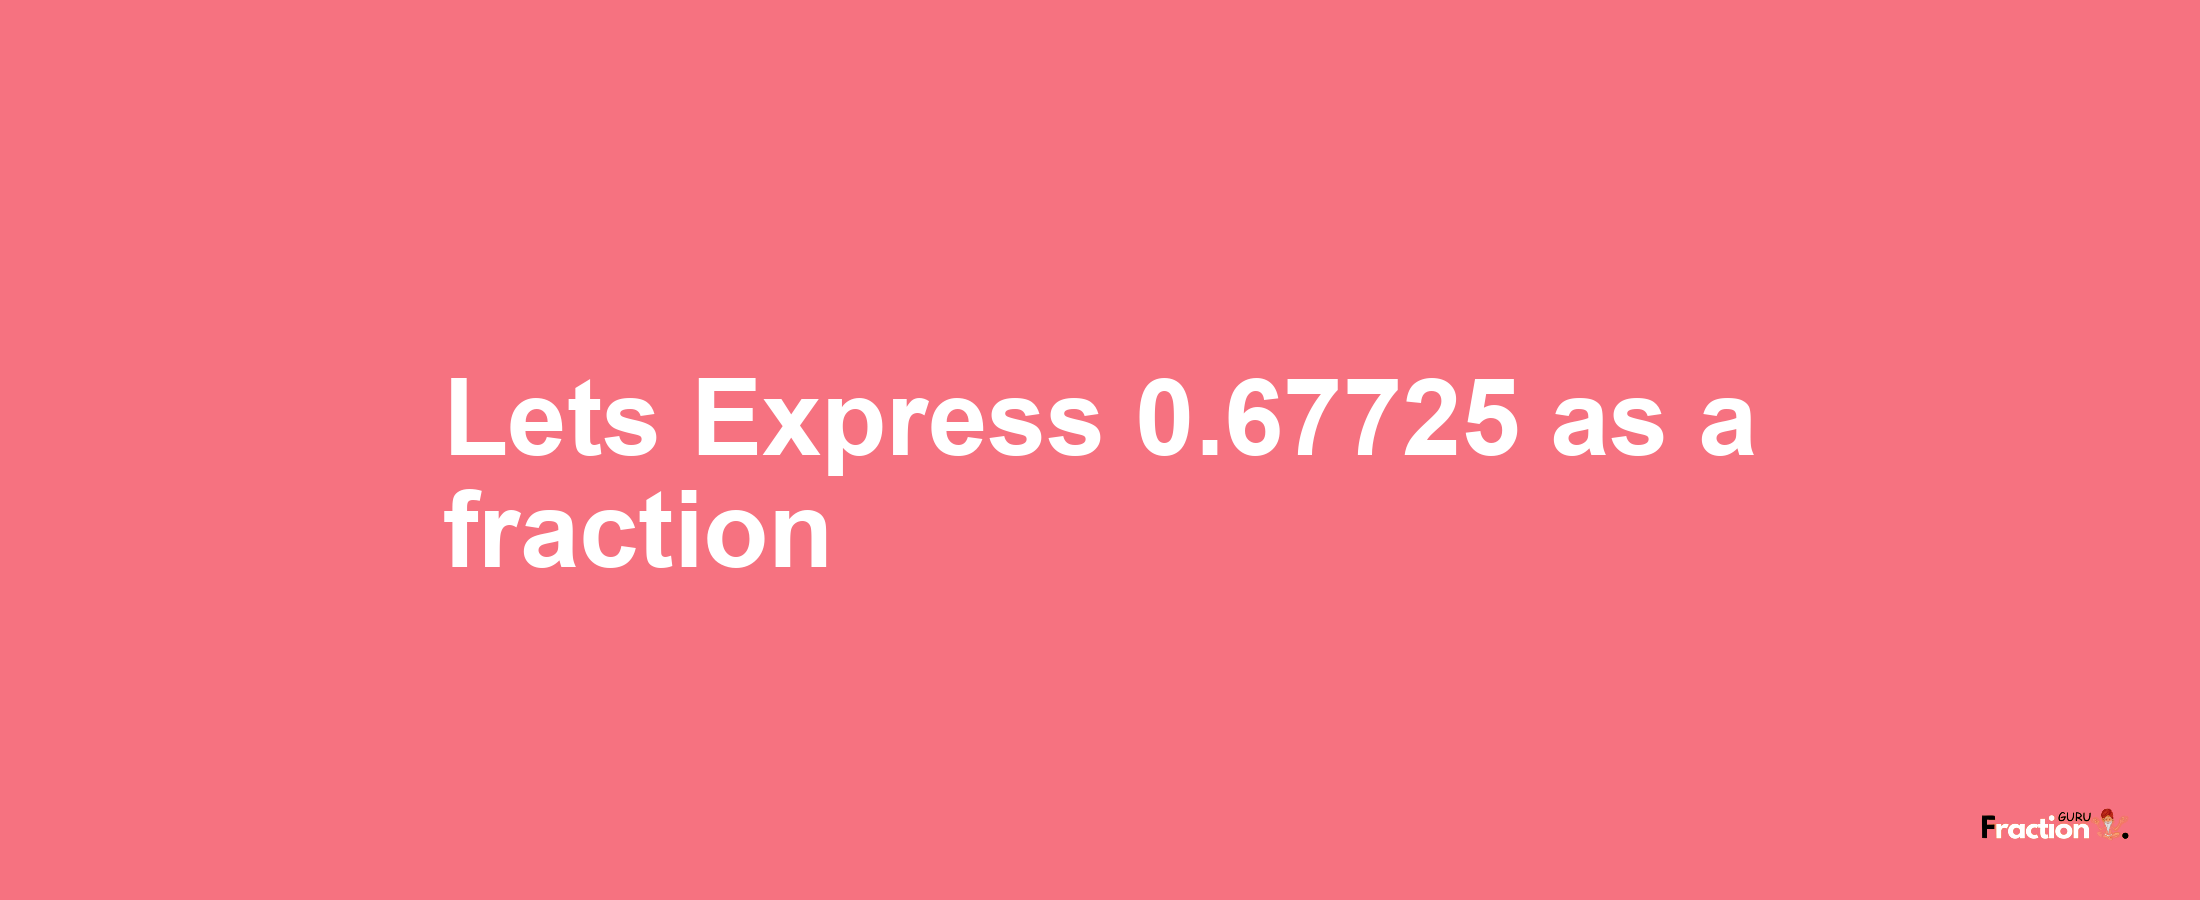 Lets Express 0.67725 as afraction